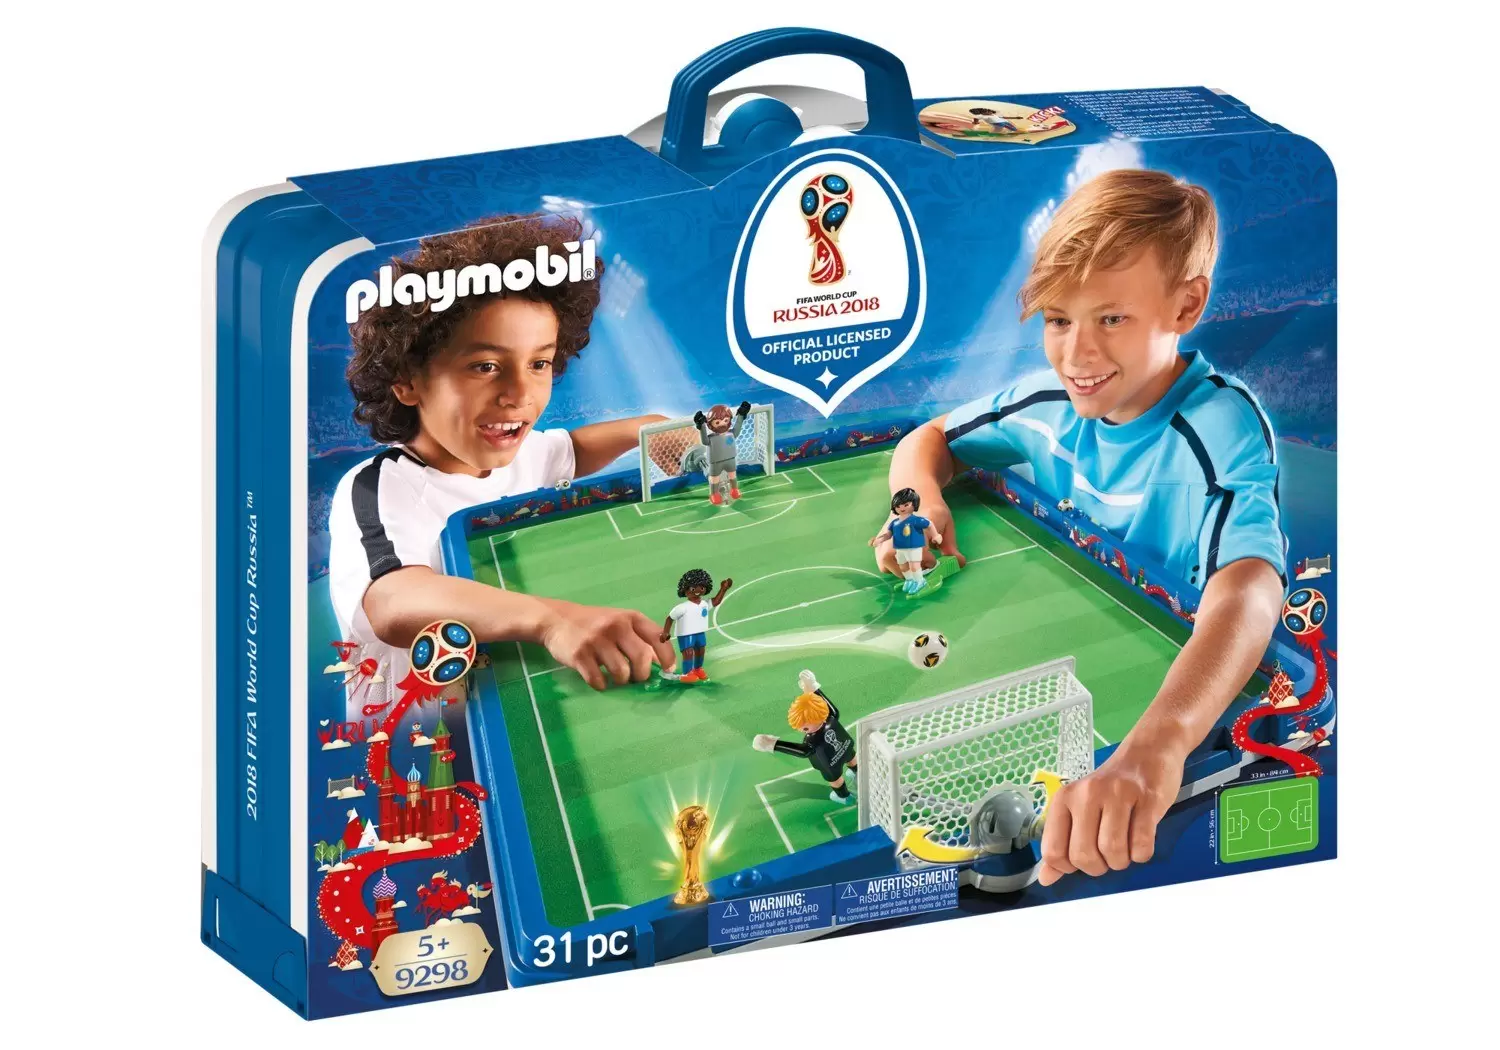 Playmobil Soccer - Take Along 2018 FIFA World Cup Russia Arena